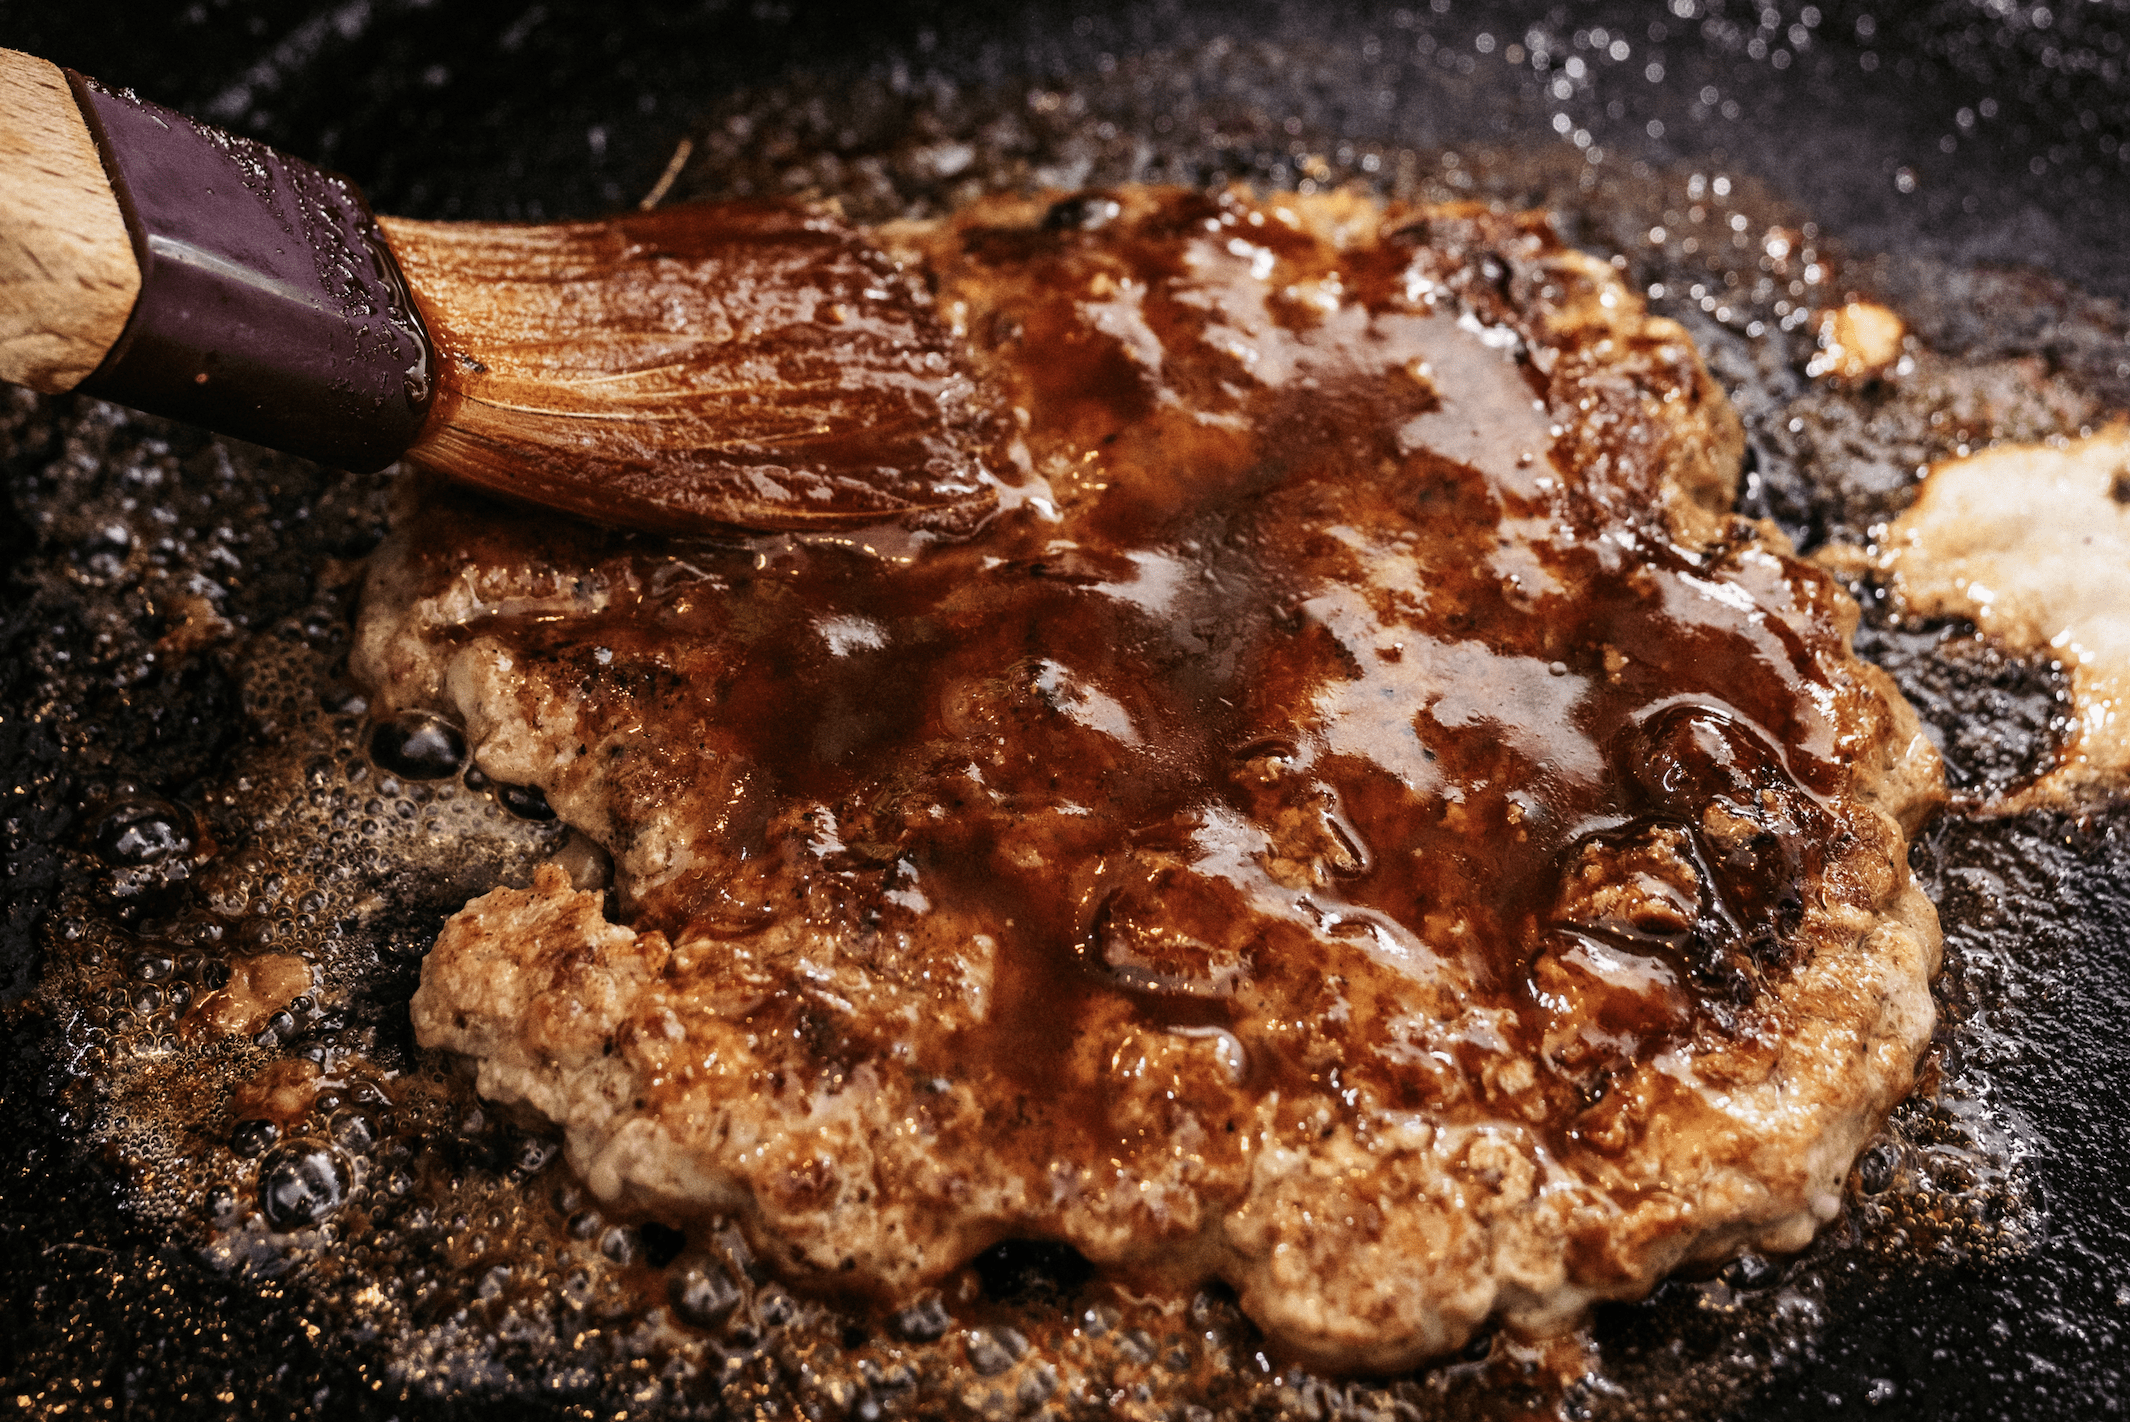 Root beer BBQ sauce spread on a burger